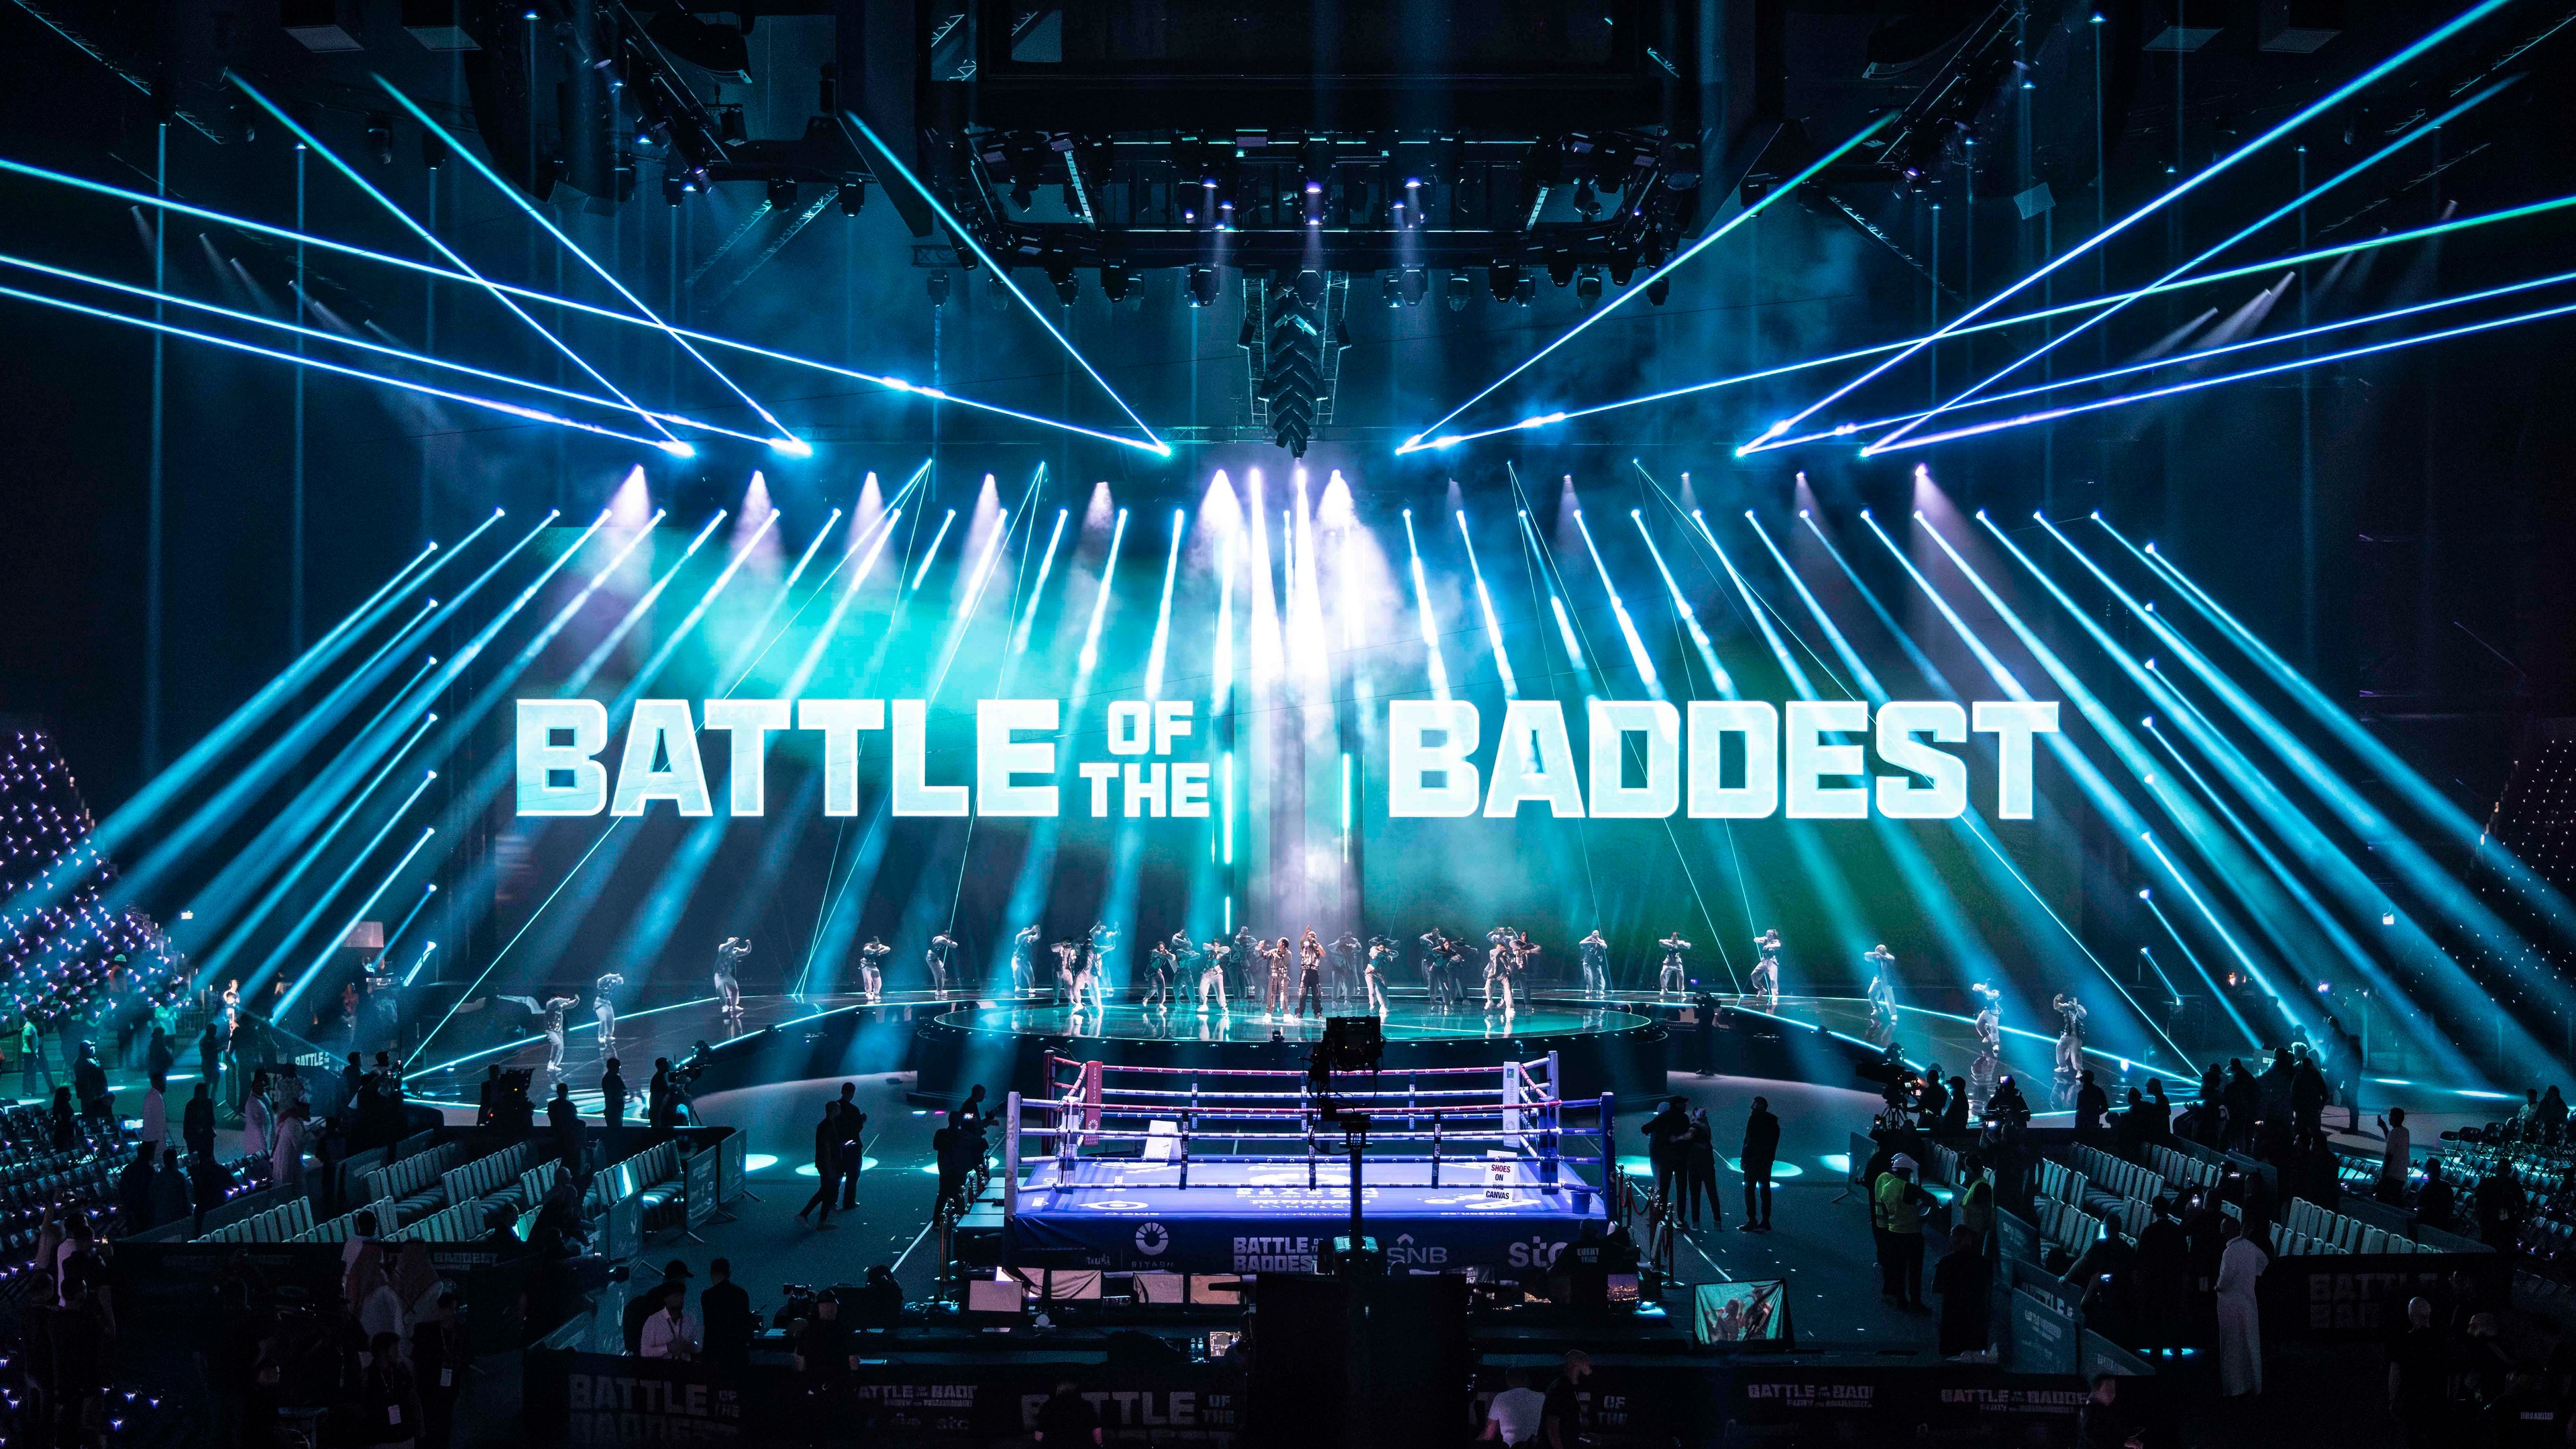 Lit up blue stage with Battle of the Baddest behind it